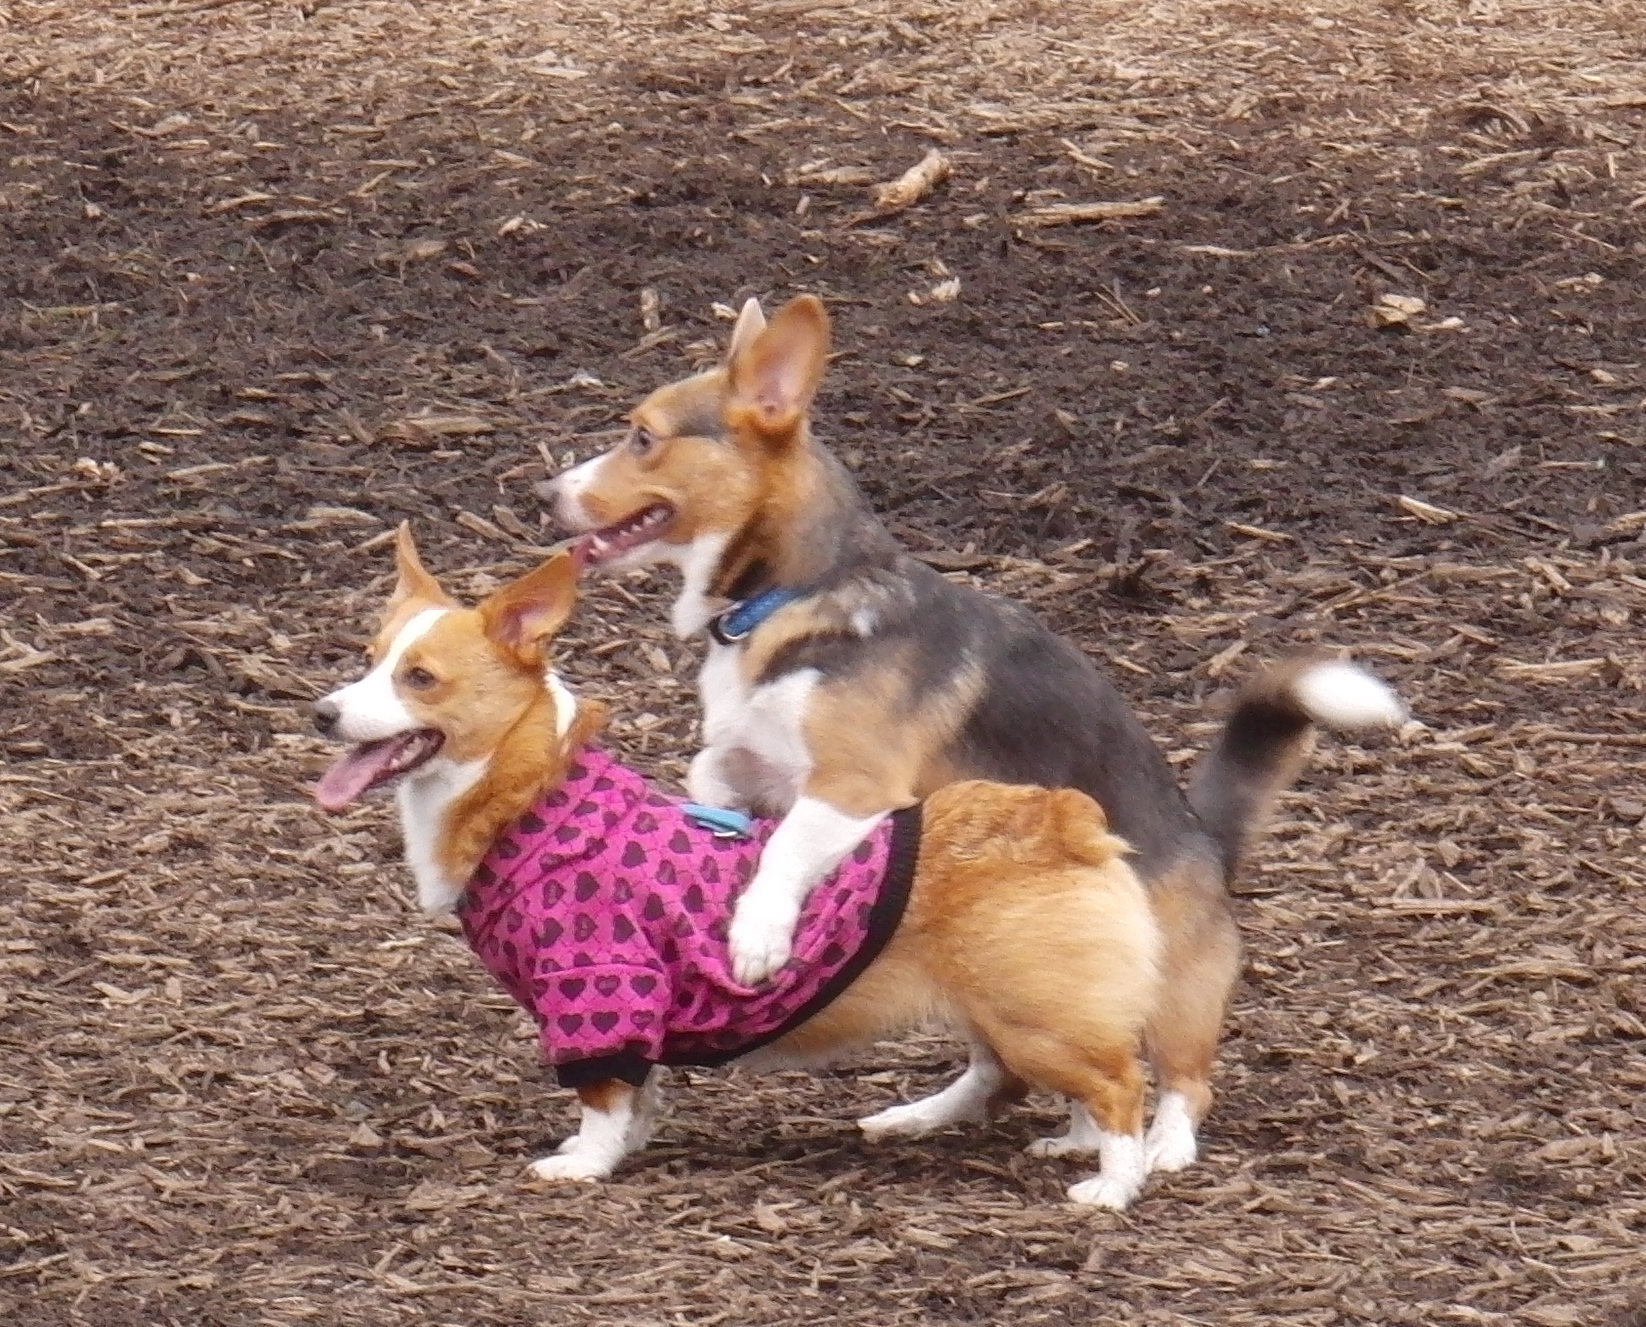 Dog of the Day: Corgi Action Shots | The Dogs of San Francisco